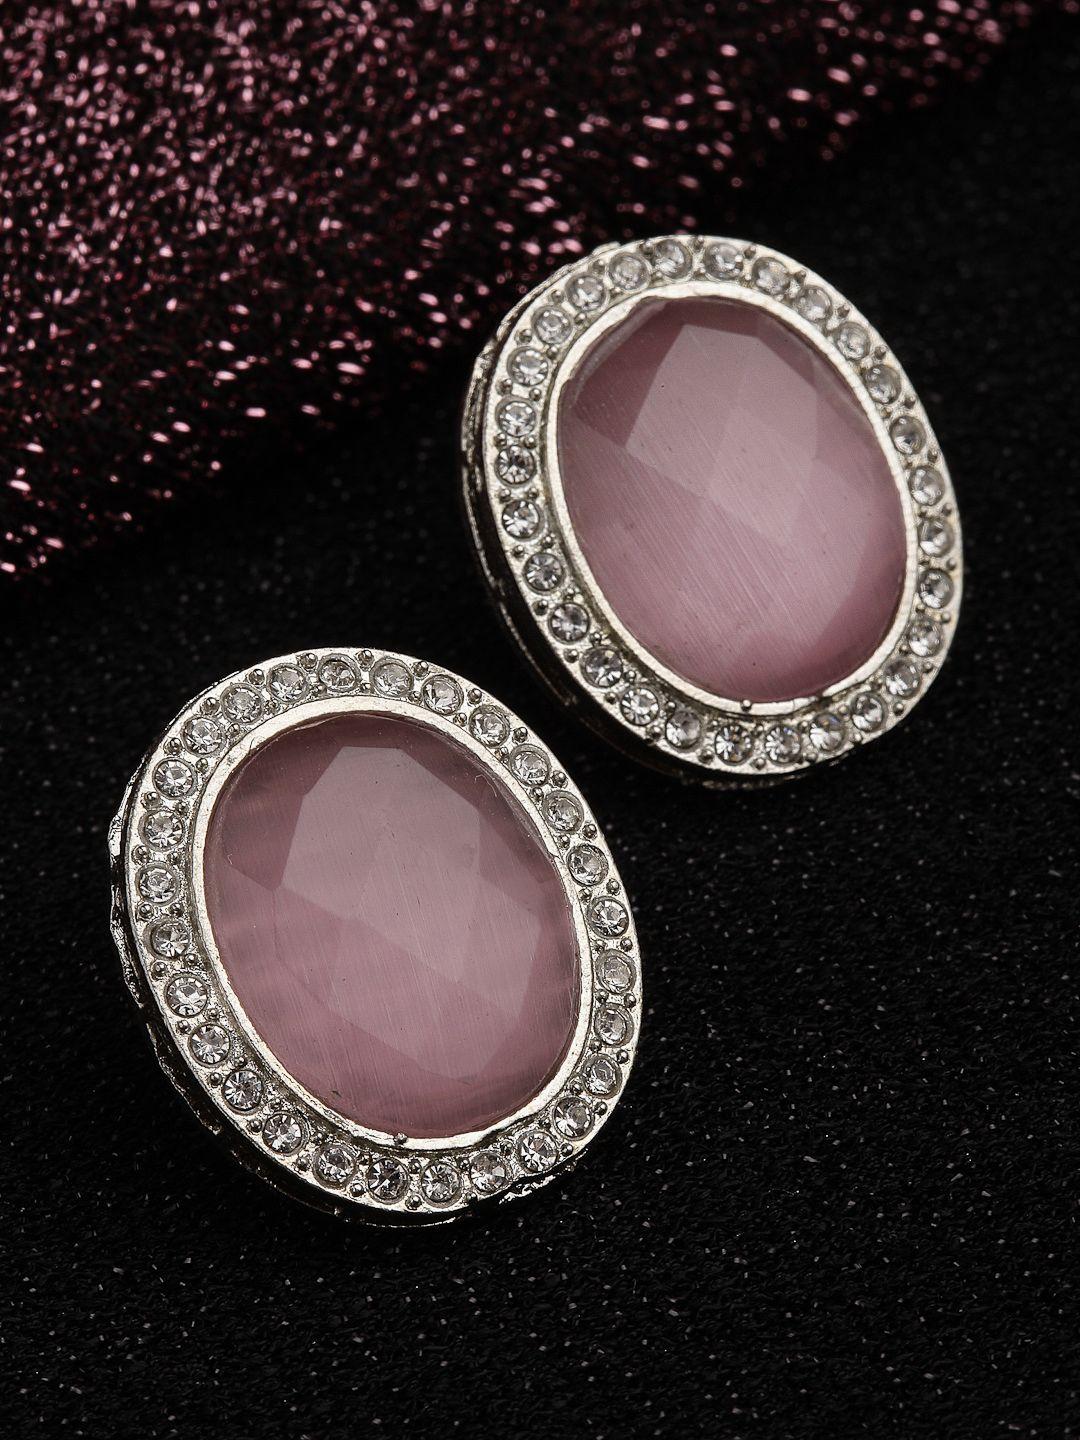 panash silver plated & peach-coloured oval studs earrings